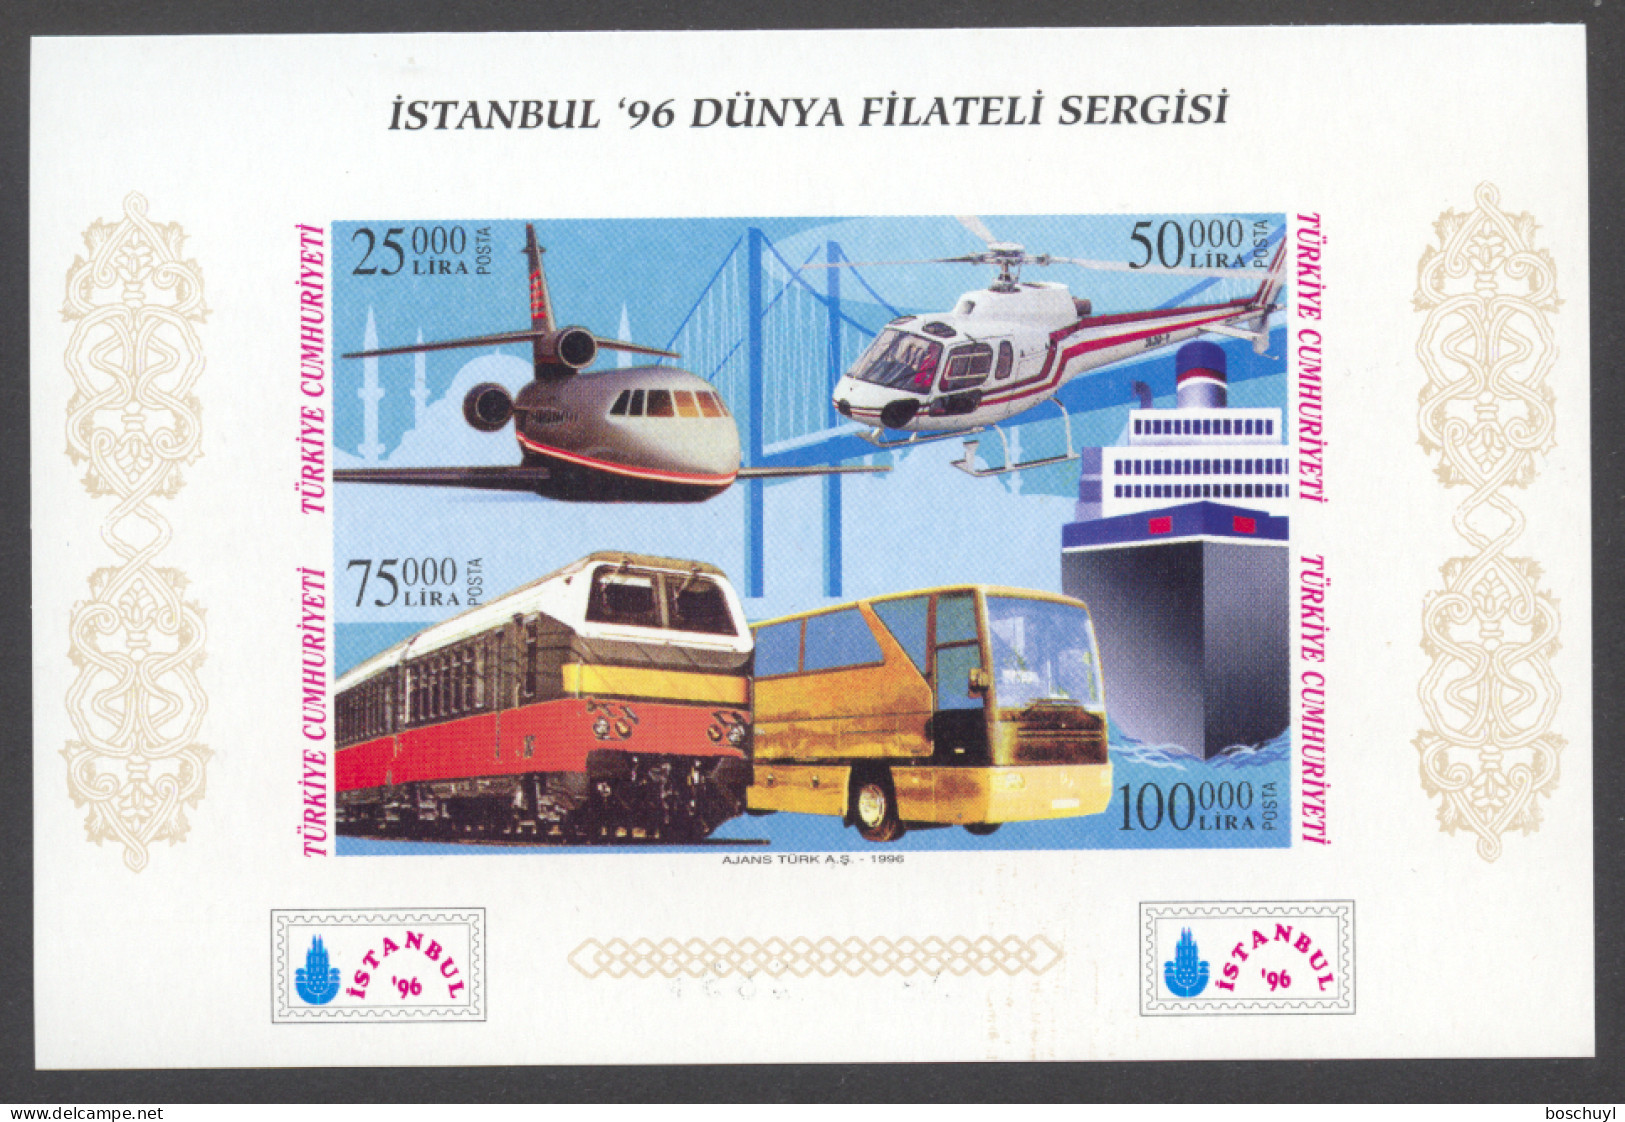 Turkey, 1996, Airplane, Helicopter, Train, Bus, Boat, Istanbul Exhibition, Black Imprint, MNH, Michel Block 32Bb - Unused Stamps